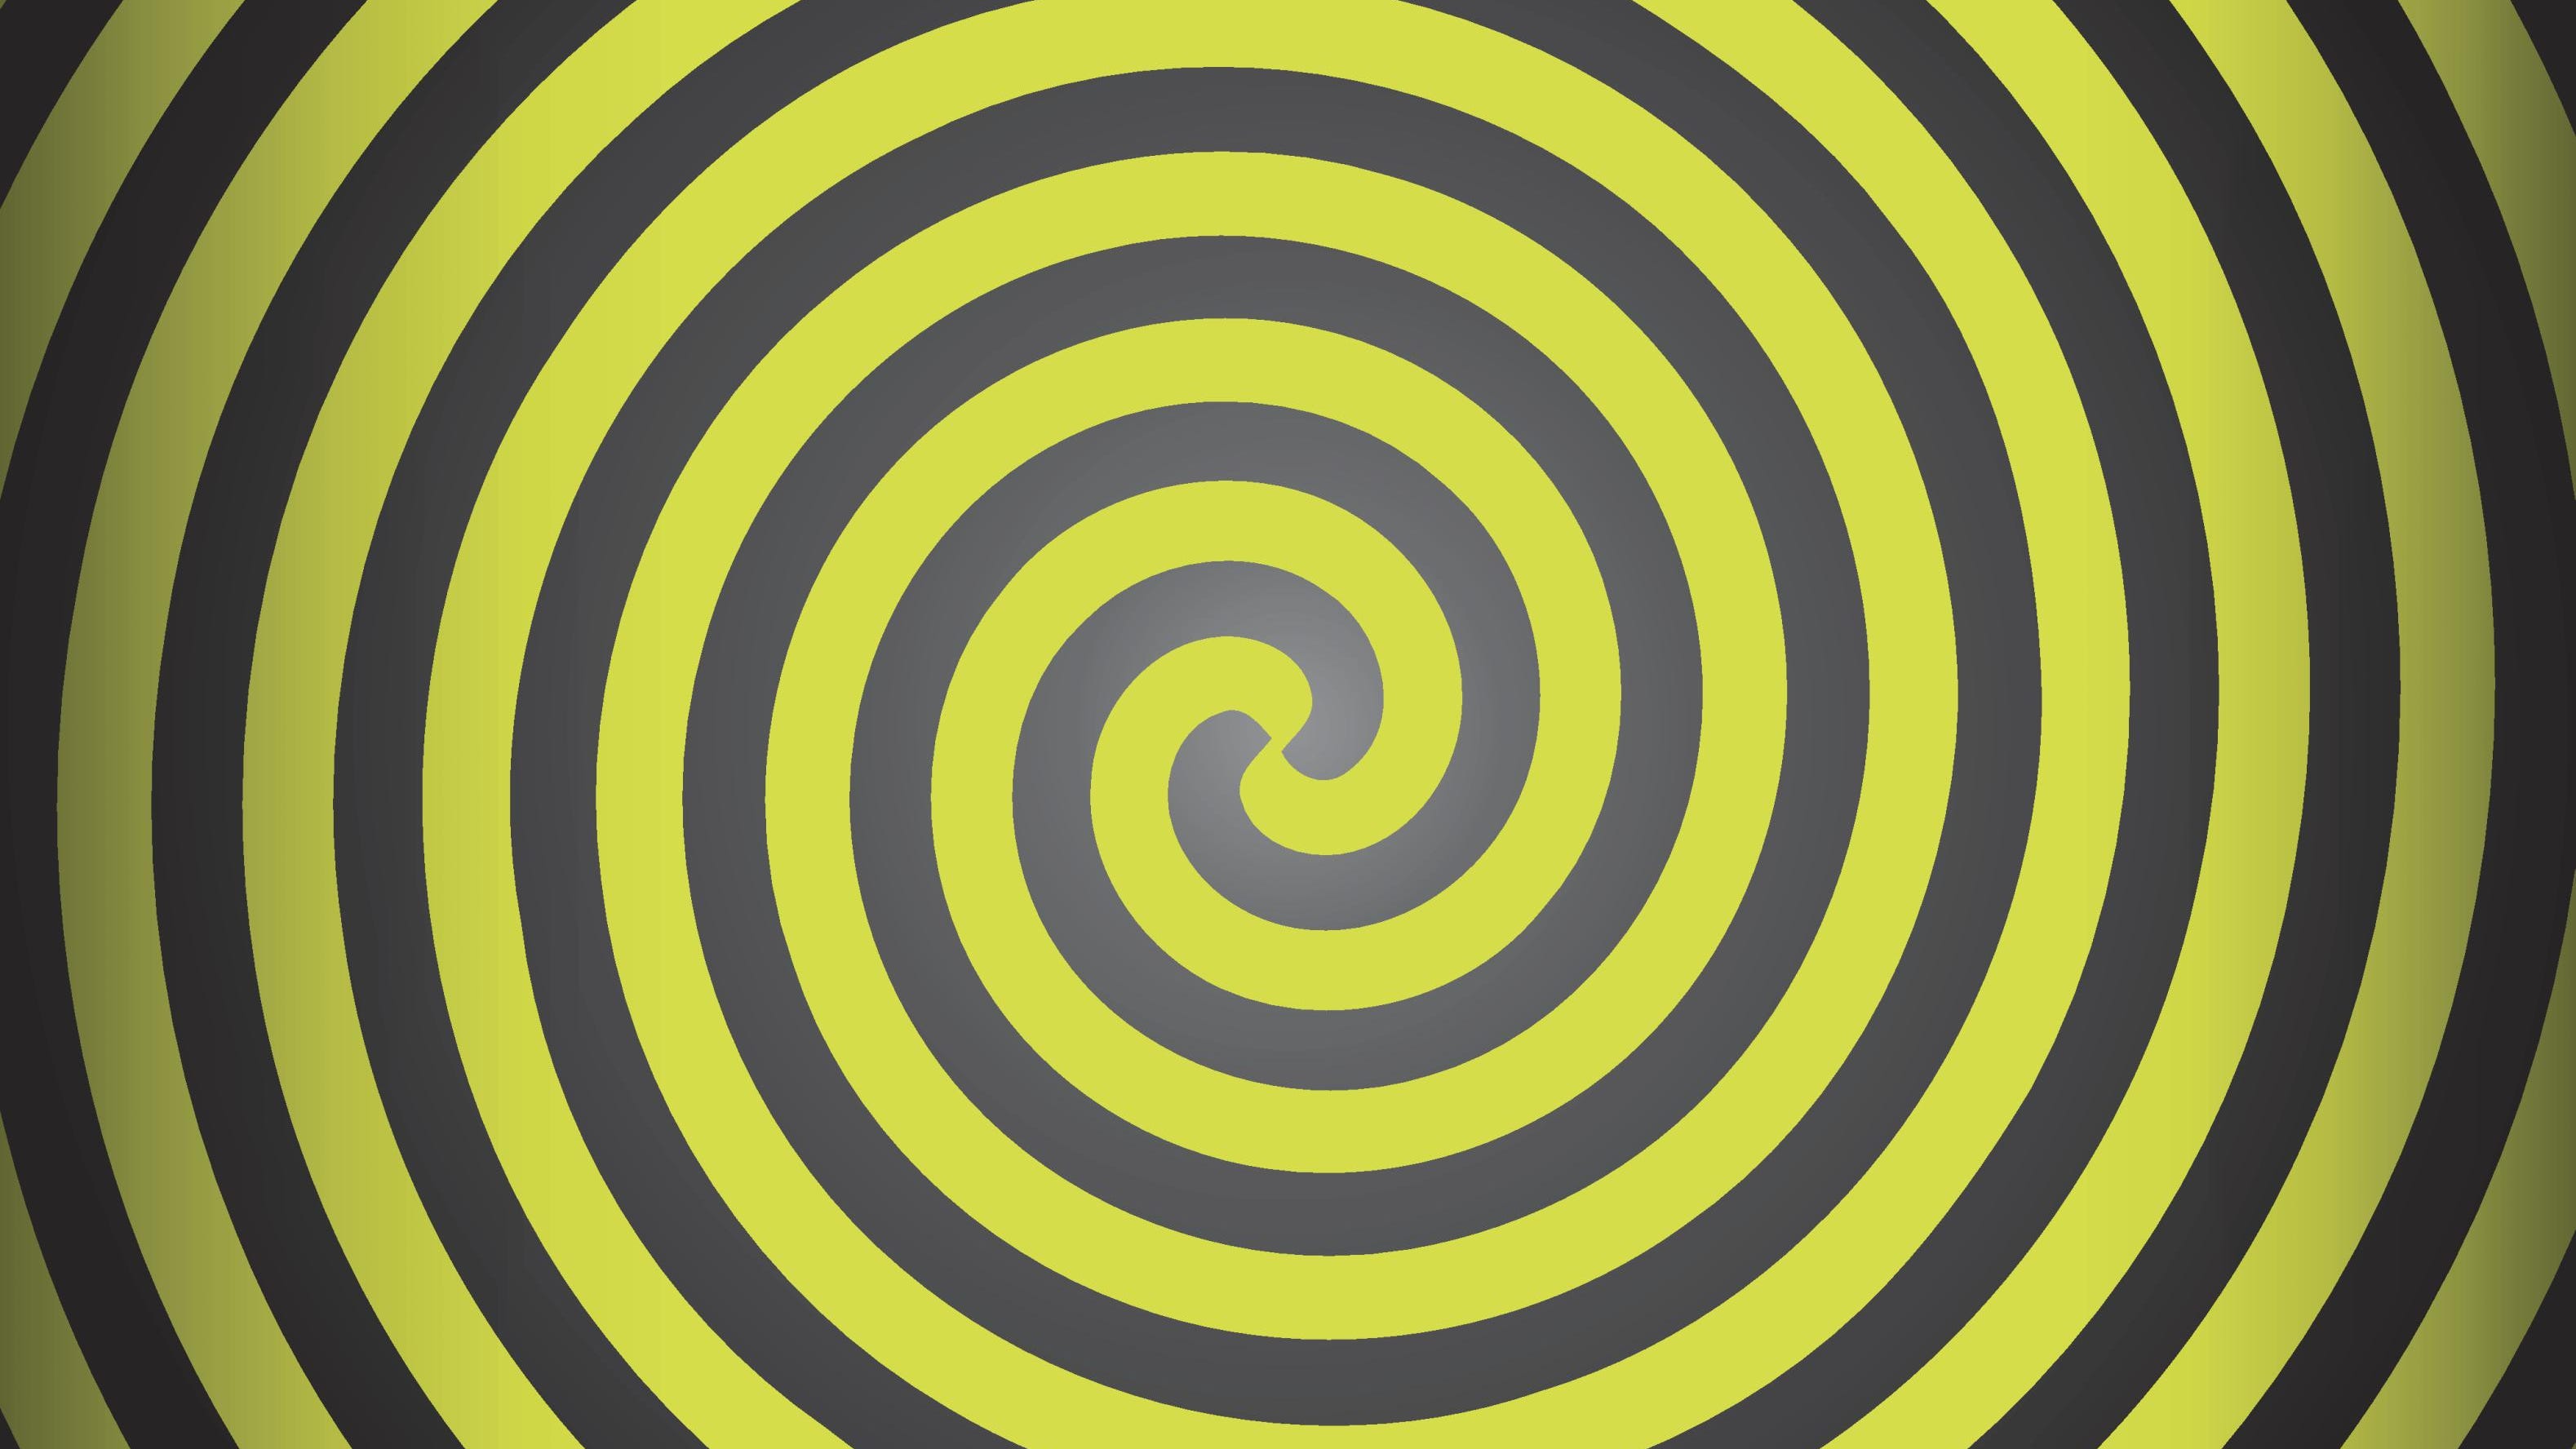 Think you can be hypnotized? Take this test